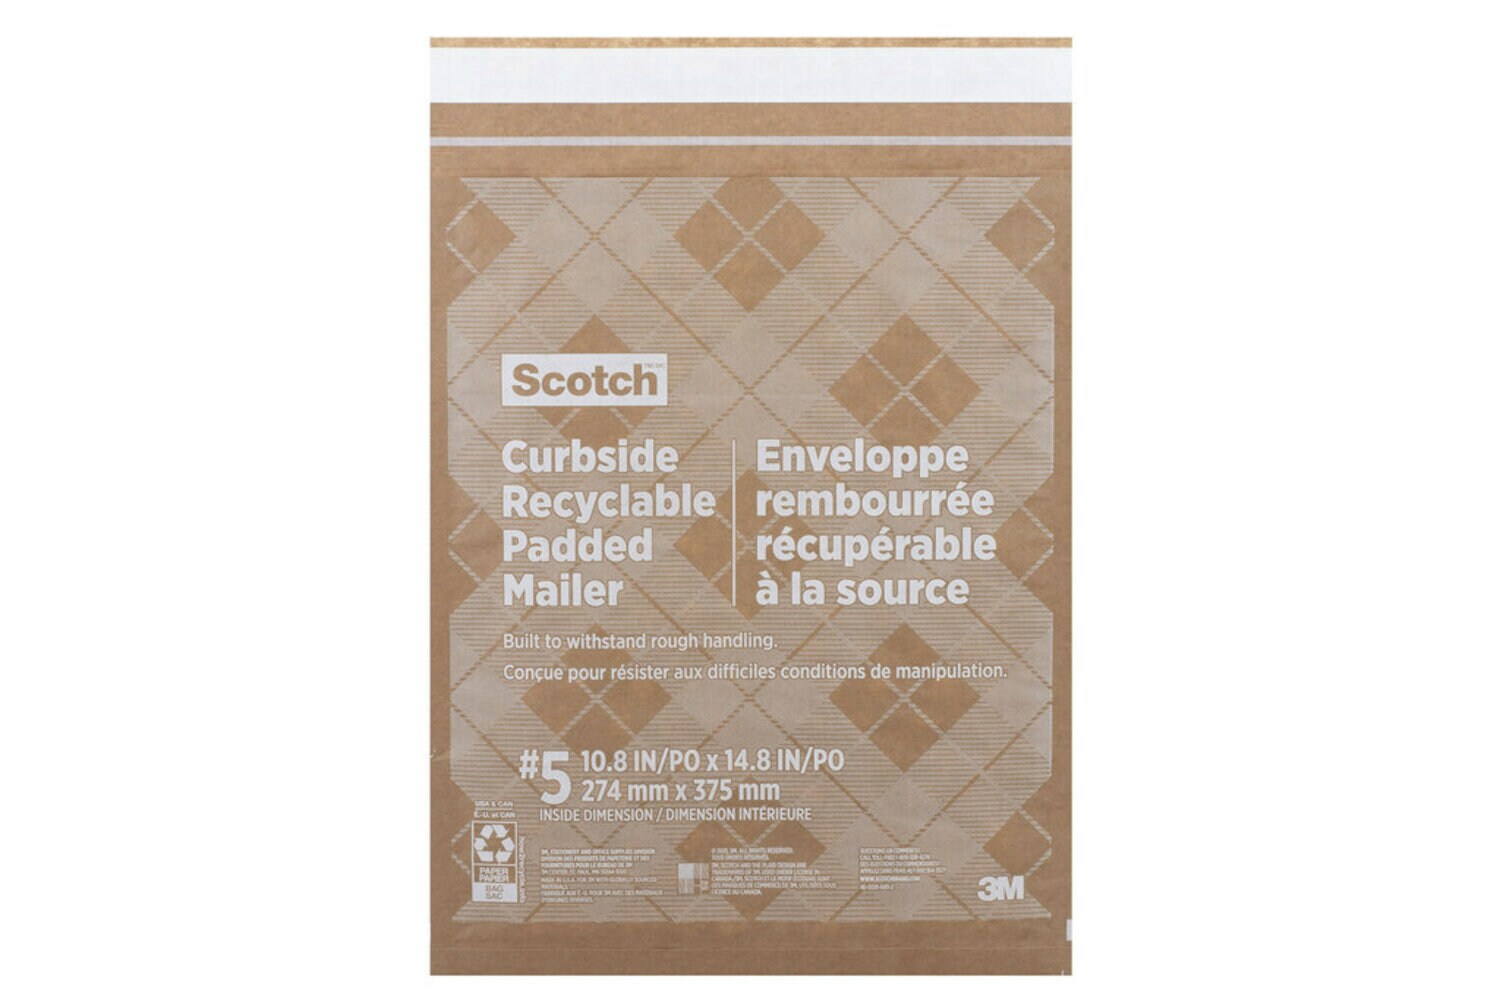 7100256598 - Scotch Curbside Recyclable Padded Mailer CR-5-1, 10.5 in x 14.75 in (266 mm x 374 mm), Size 5